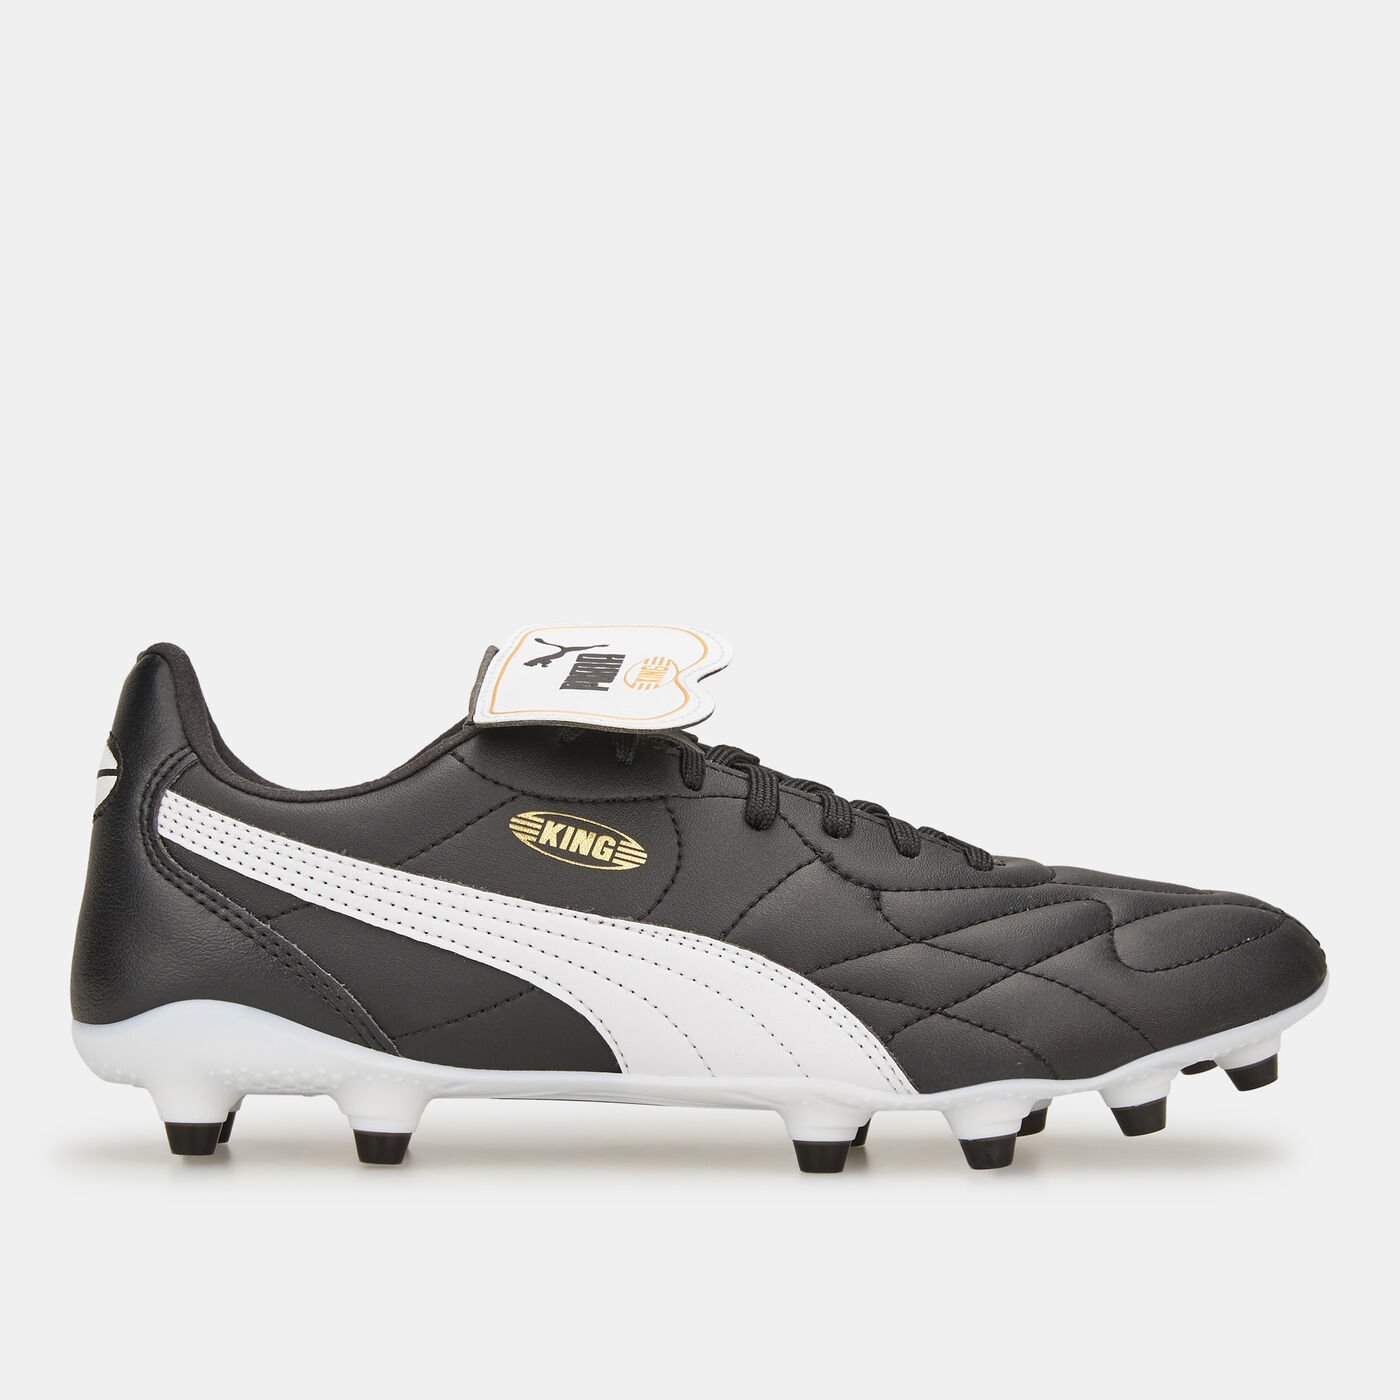 Men's King Top Multi-Ground Football Shoes